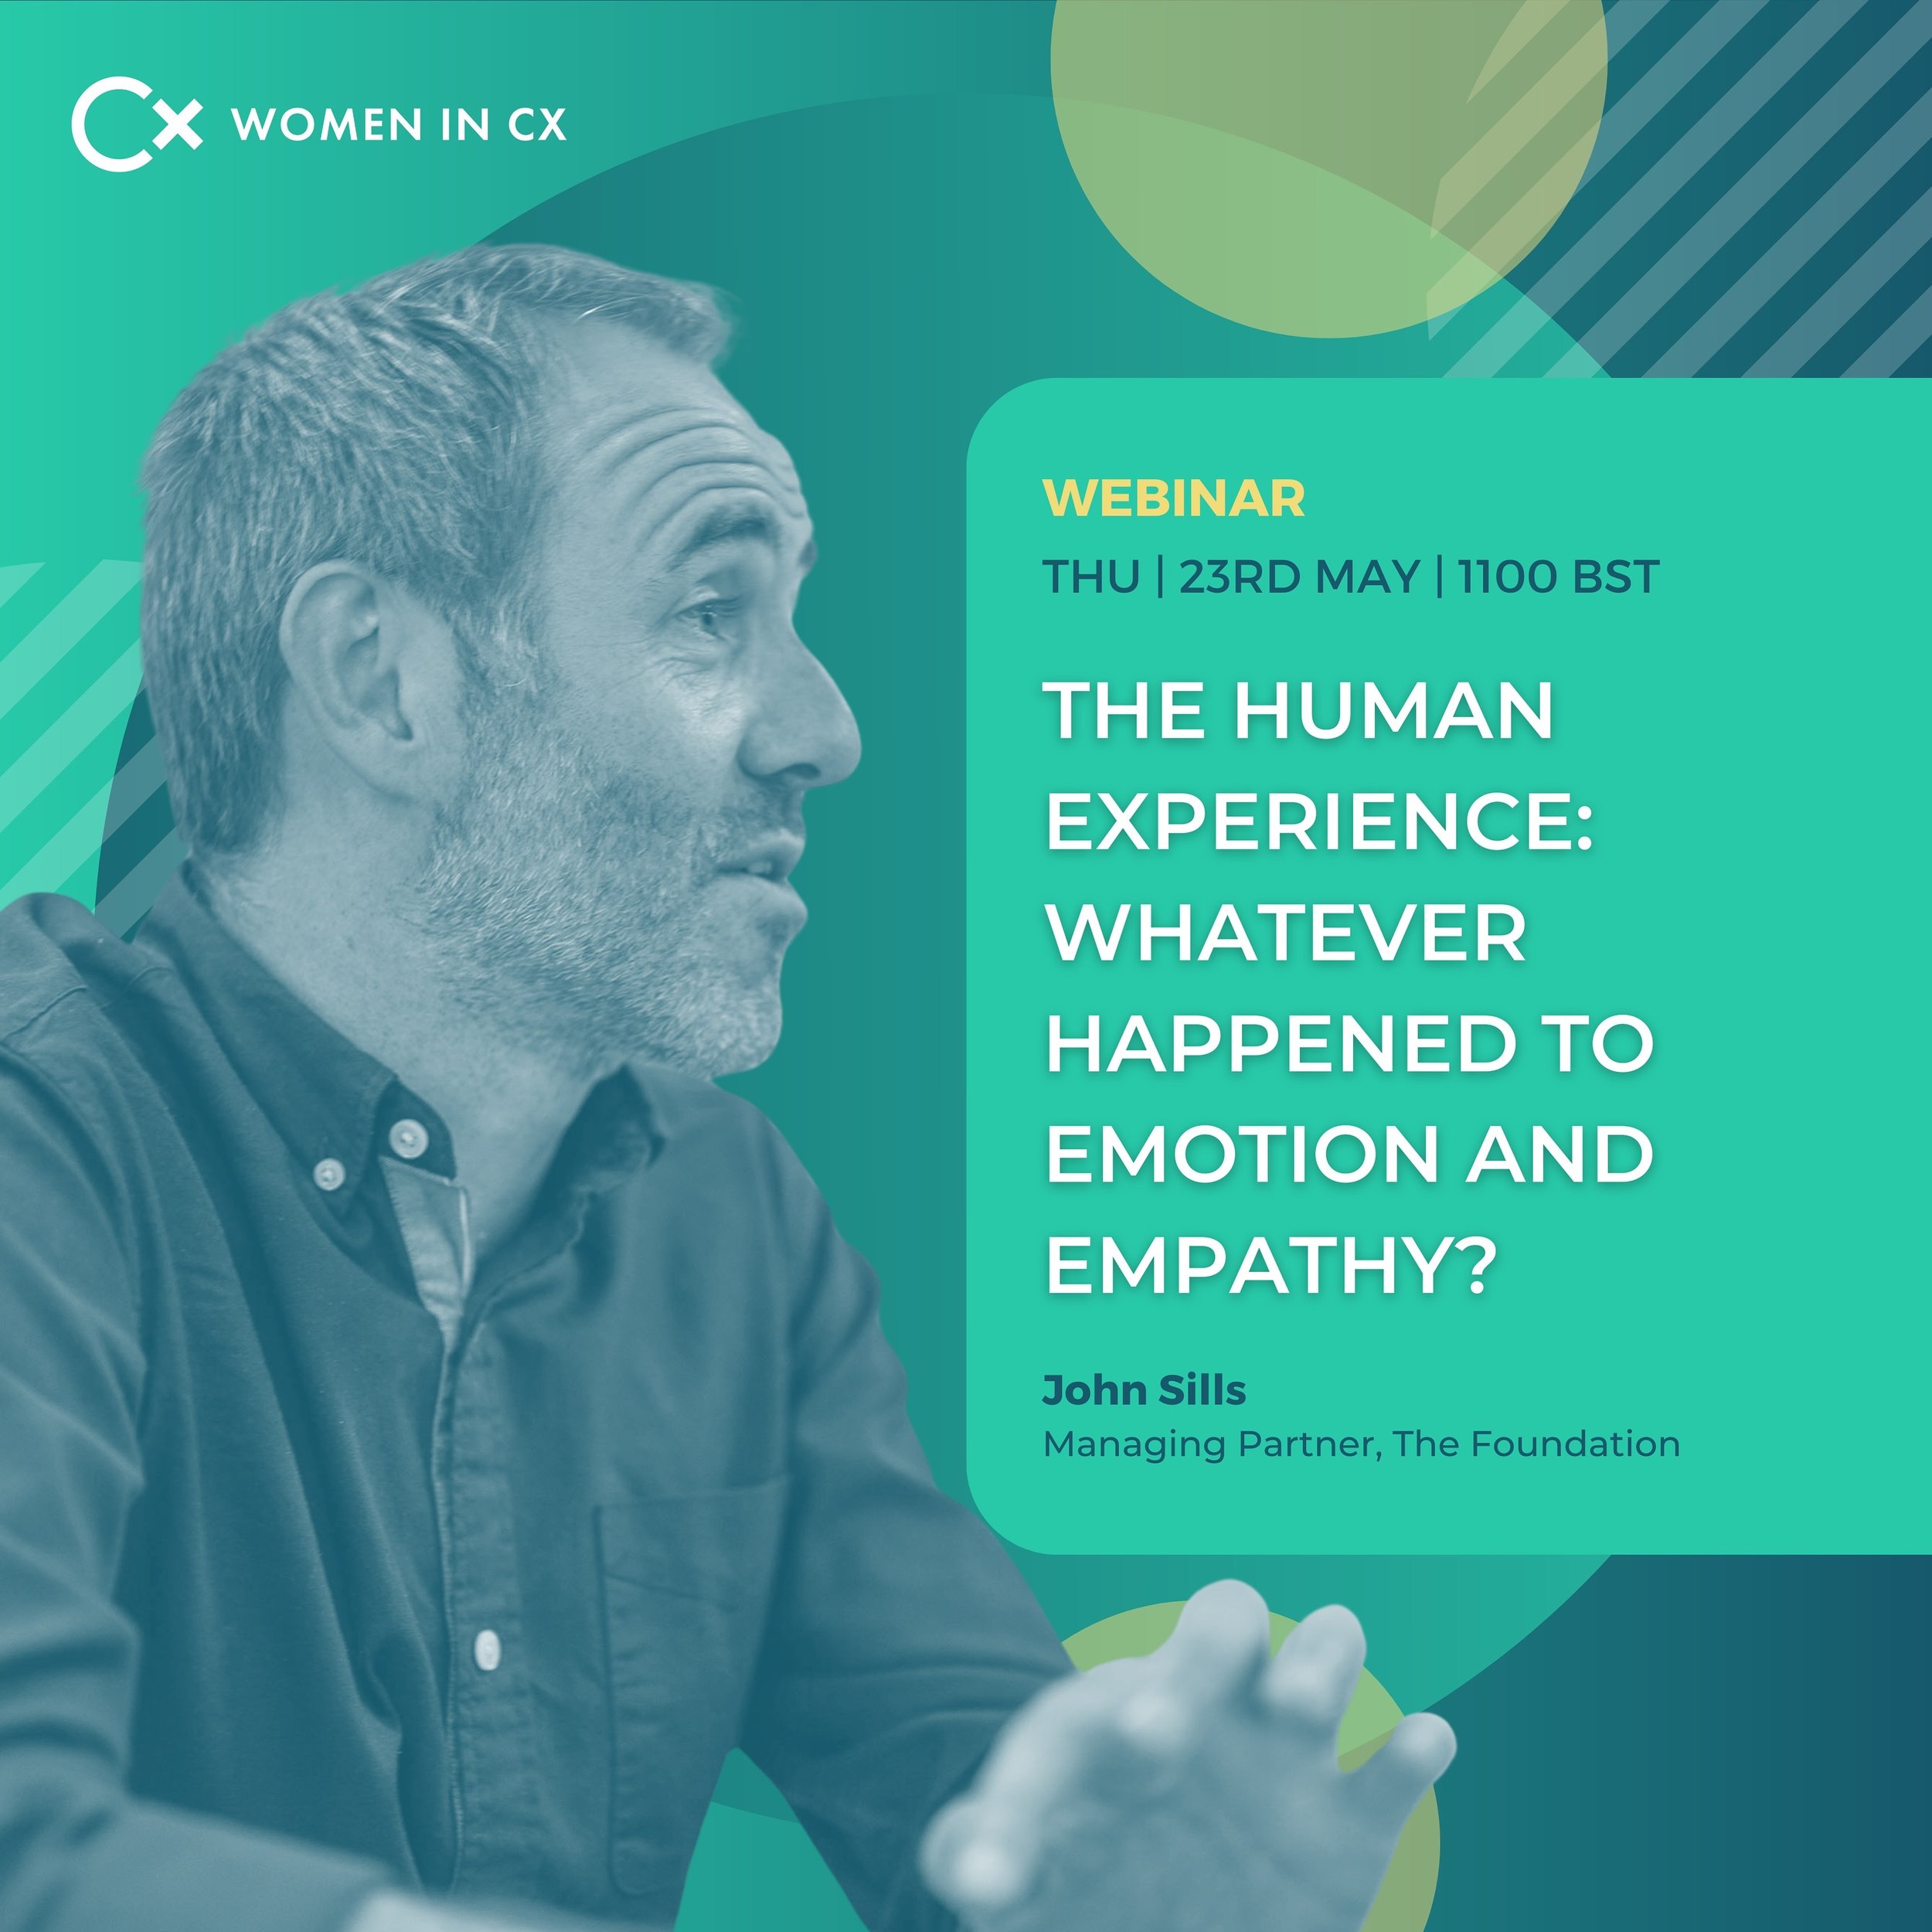 Didn&rsquo;t catch his WiCX Talk at our conference last October? 🤔
&nbsp;
Next Thursday, join John Sills, Managing Partner at The Foundation, as he delivers his exclusive keynote, &lsquo;The Human Experience: Whatever Happened to Emotion and Empathy